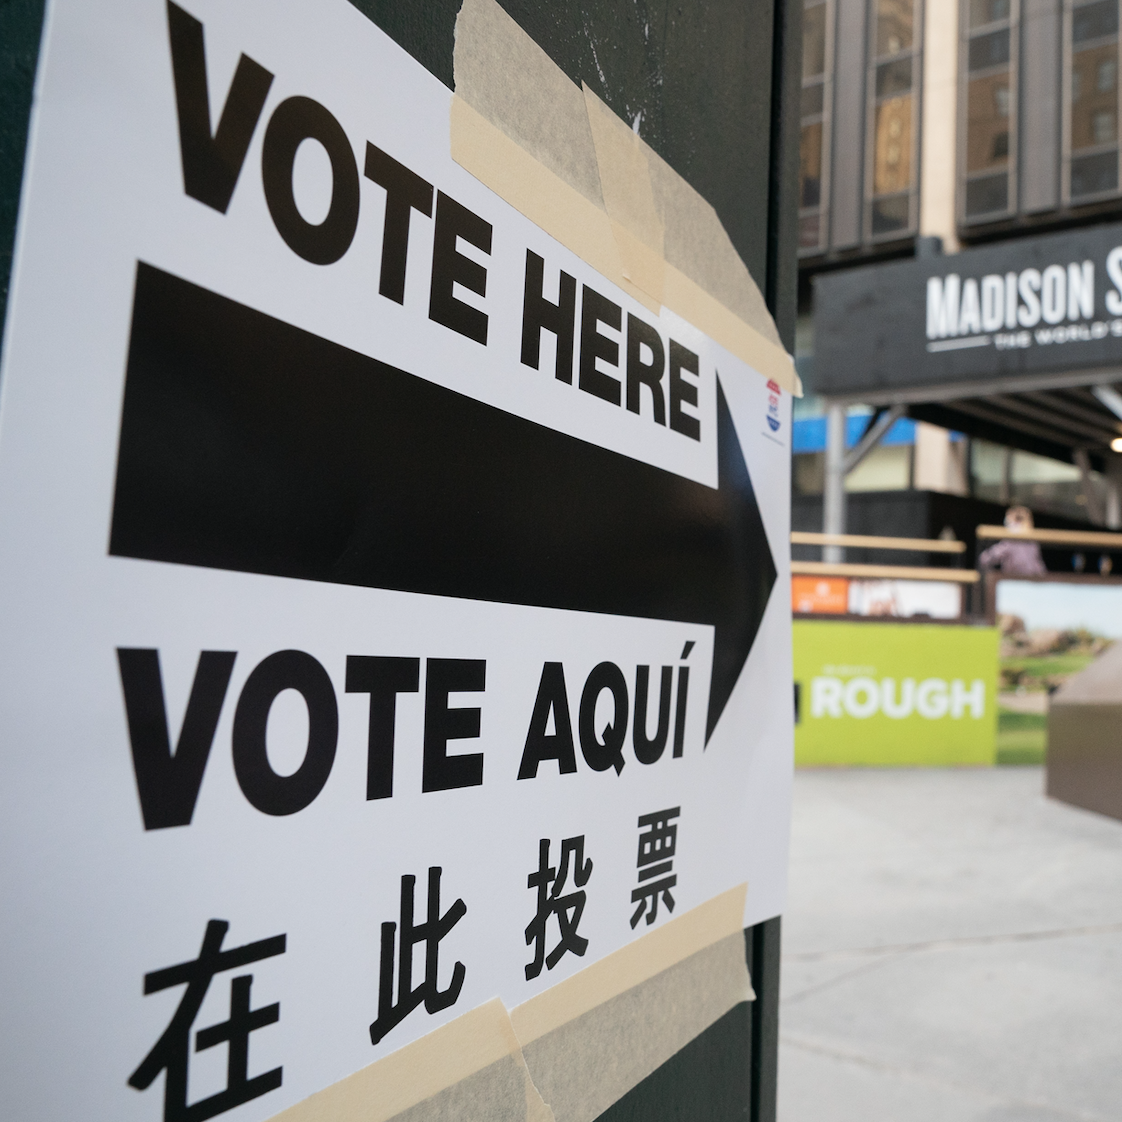 Let our people vote: Legal permanent residents should be able to vote in local elections